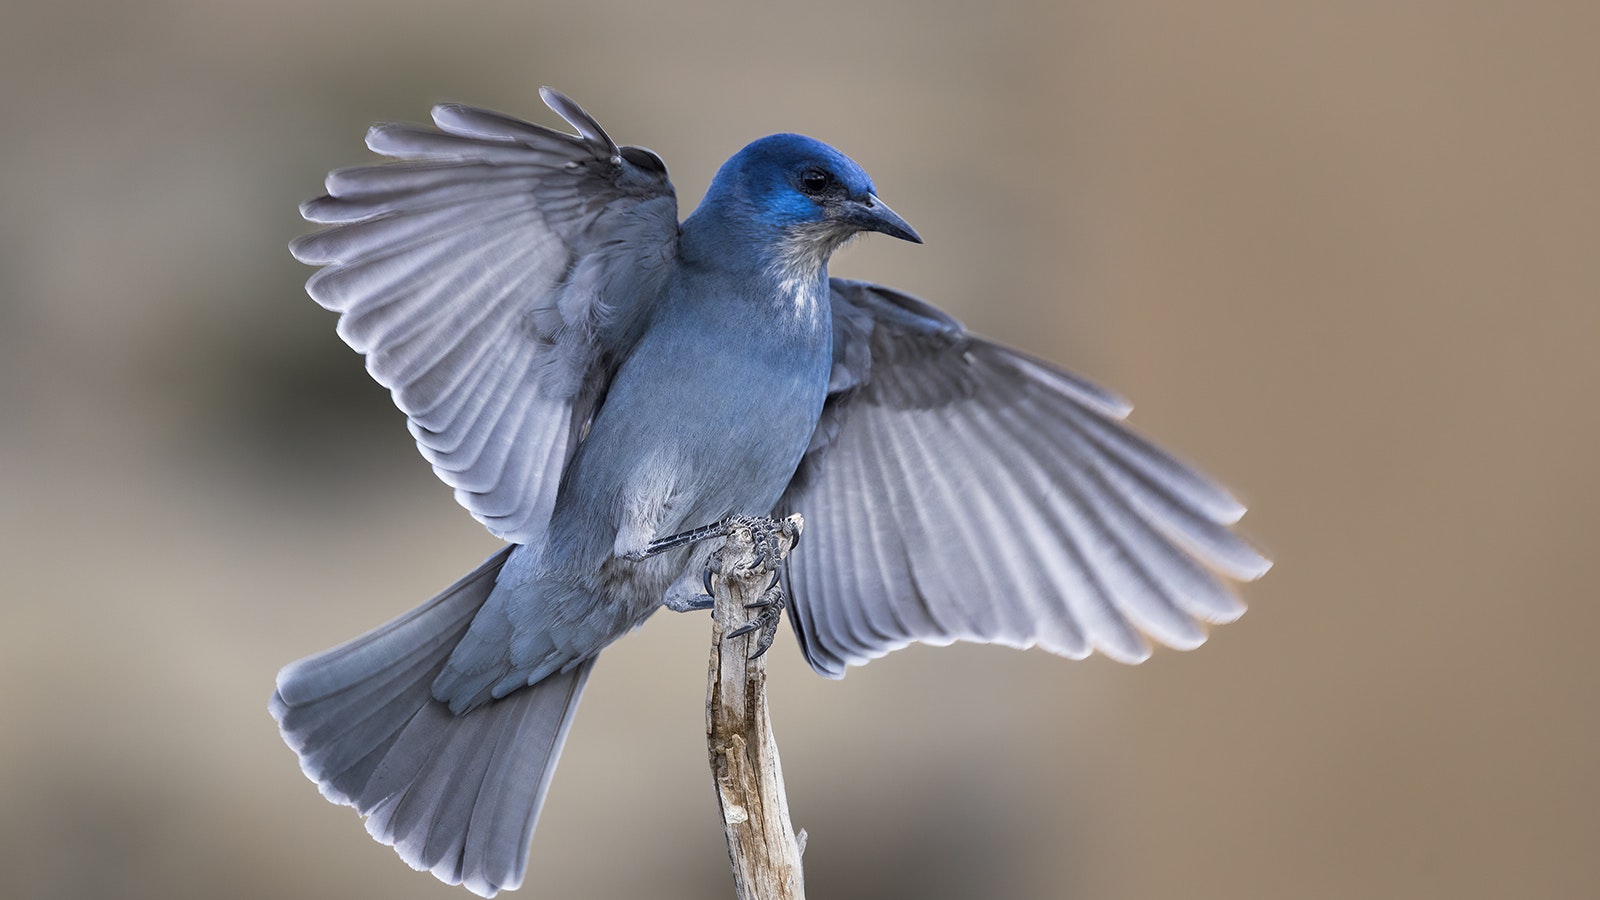 The pinyon jay has been identified as a Species of Greatest Conservation Need in state wildlife action plans across its range after having undergone an 80 percent decline in population in the last half-century.